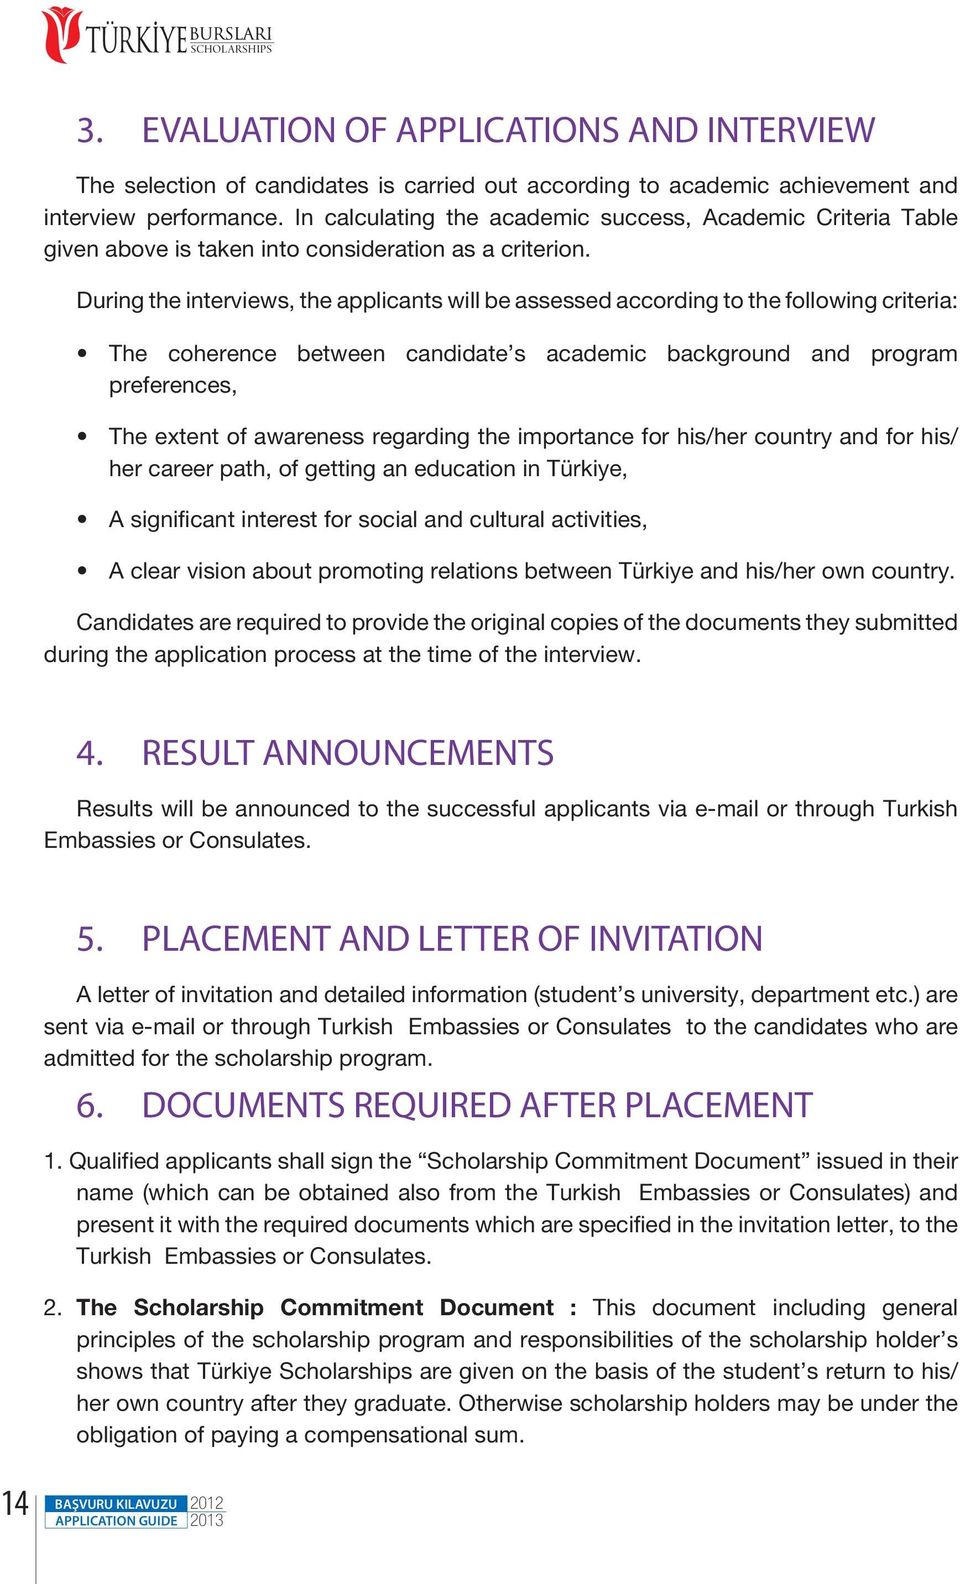 During the interviews, the applicants will be assessed according to the following criteria: The coherence between candidate s academic background and program preferences, The extent of awareness